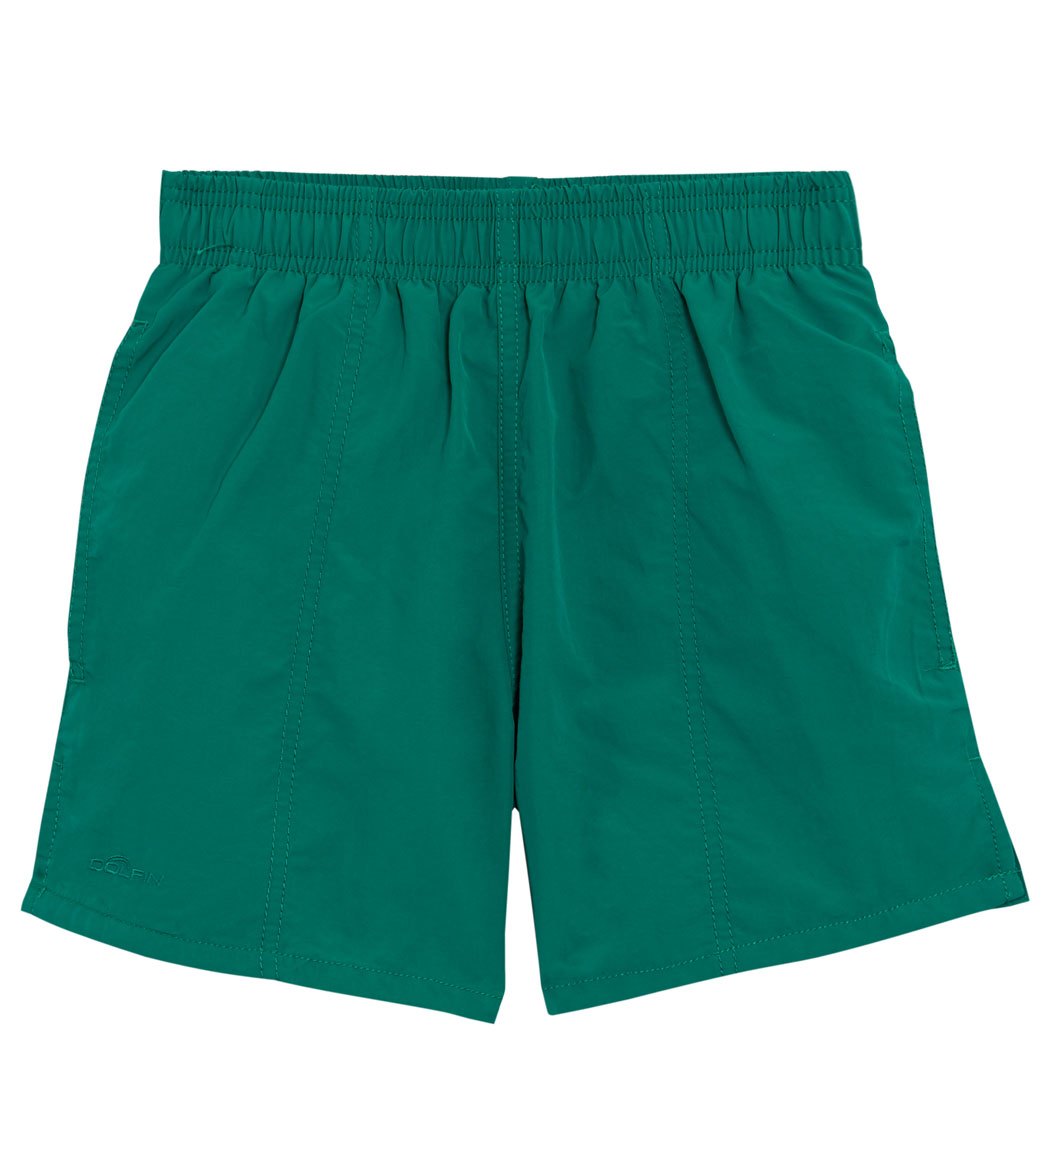 Dolfin Youth Water Short - Green Small Nylon/Polyester - Swimoutlet.com